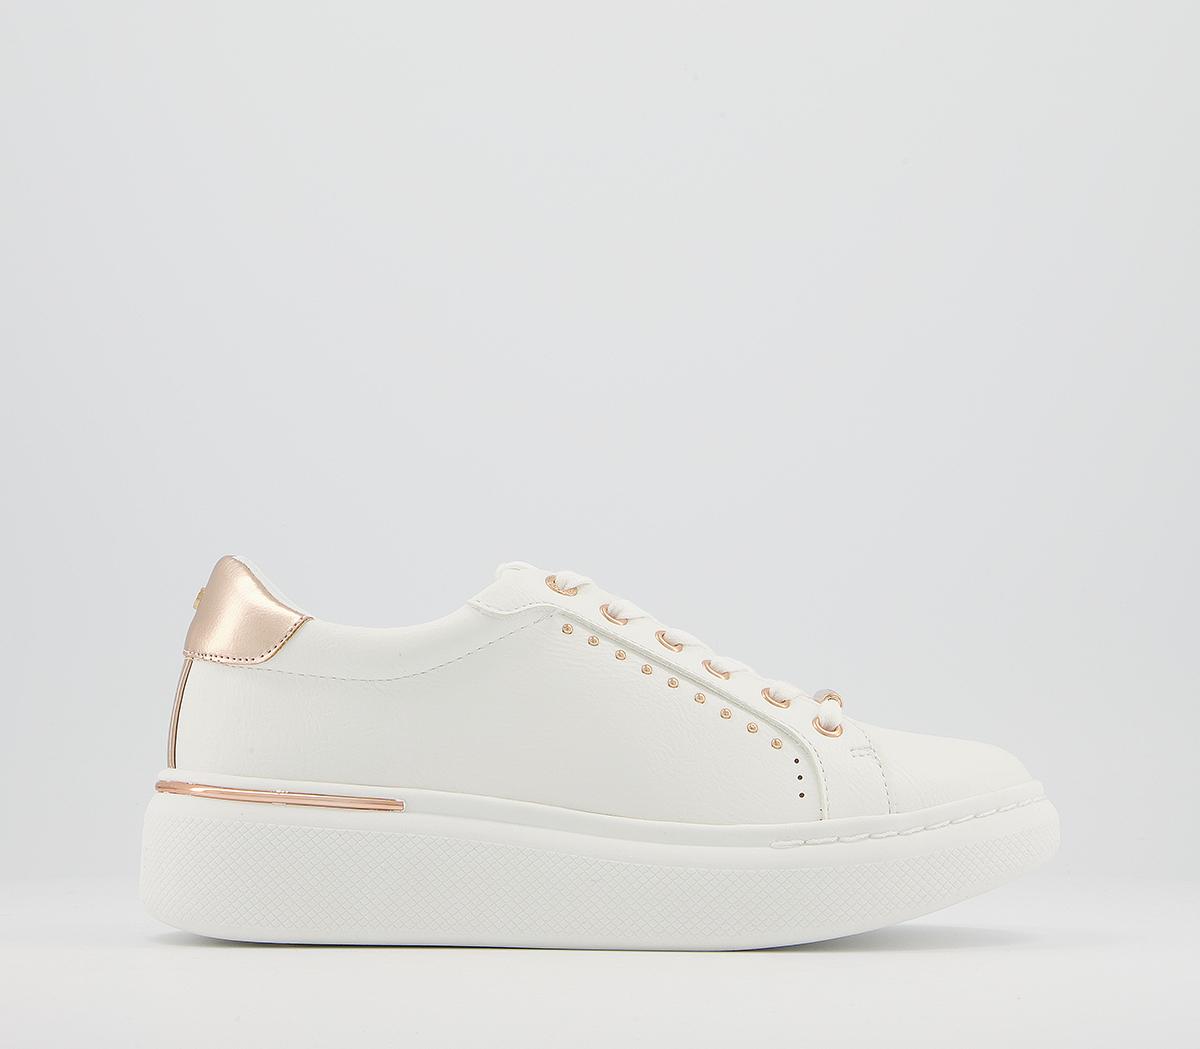 OFFICEFinish Lace Up TrainersWhite With Rosegold Hardware